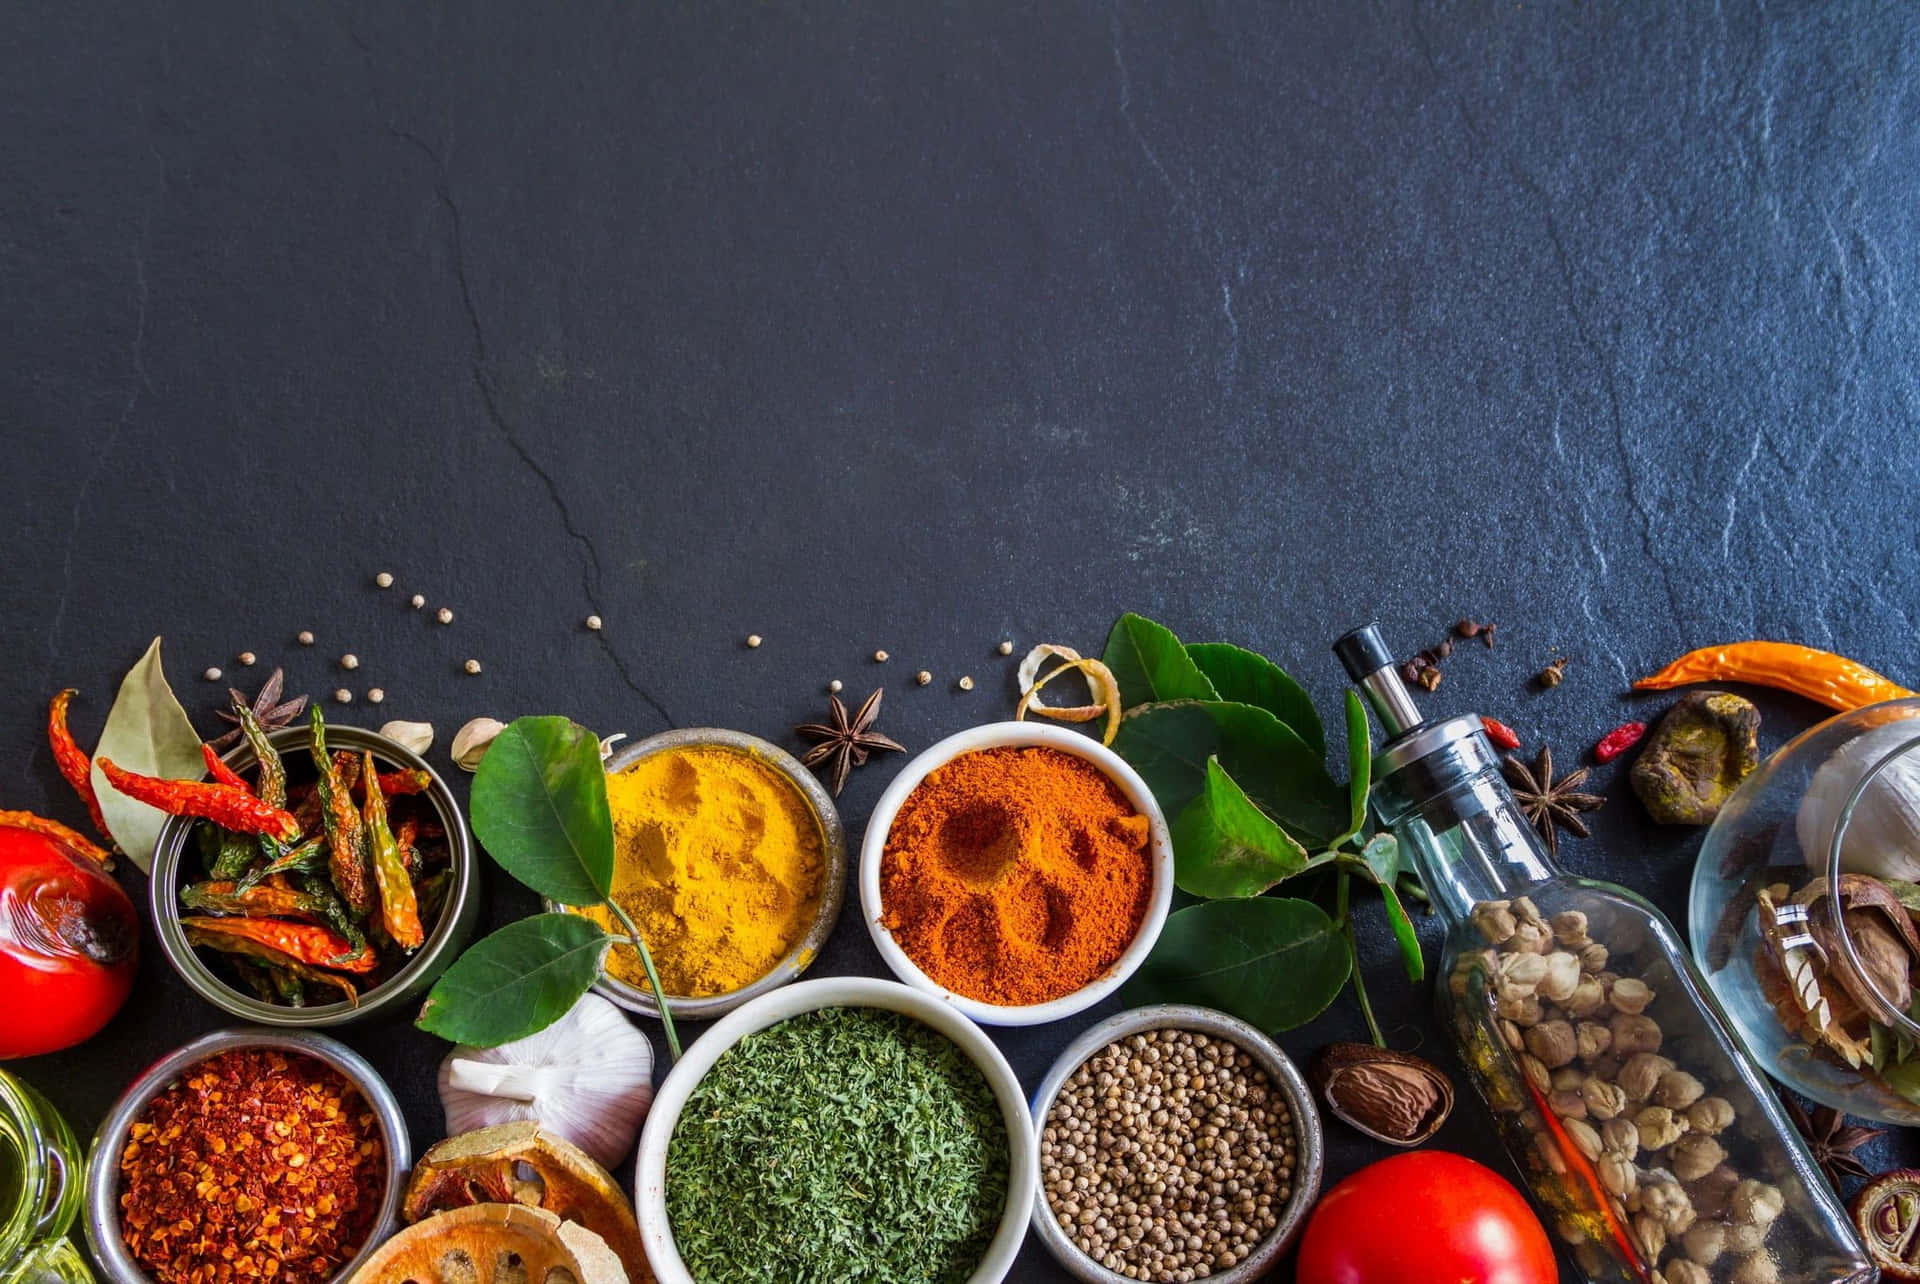 Aesthetic Spices Of Indian Food Wallpaper